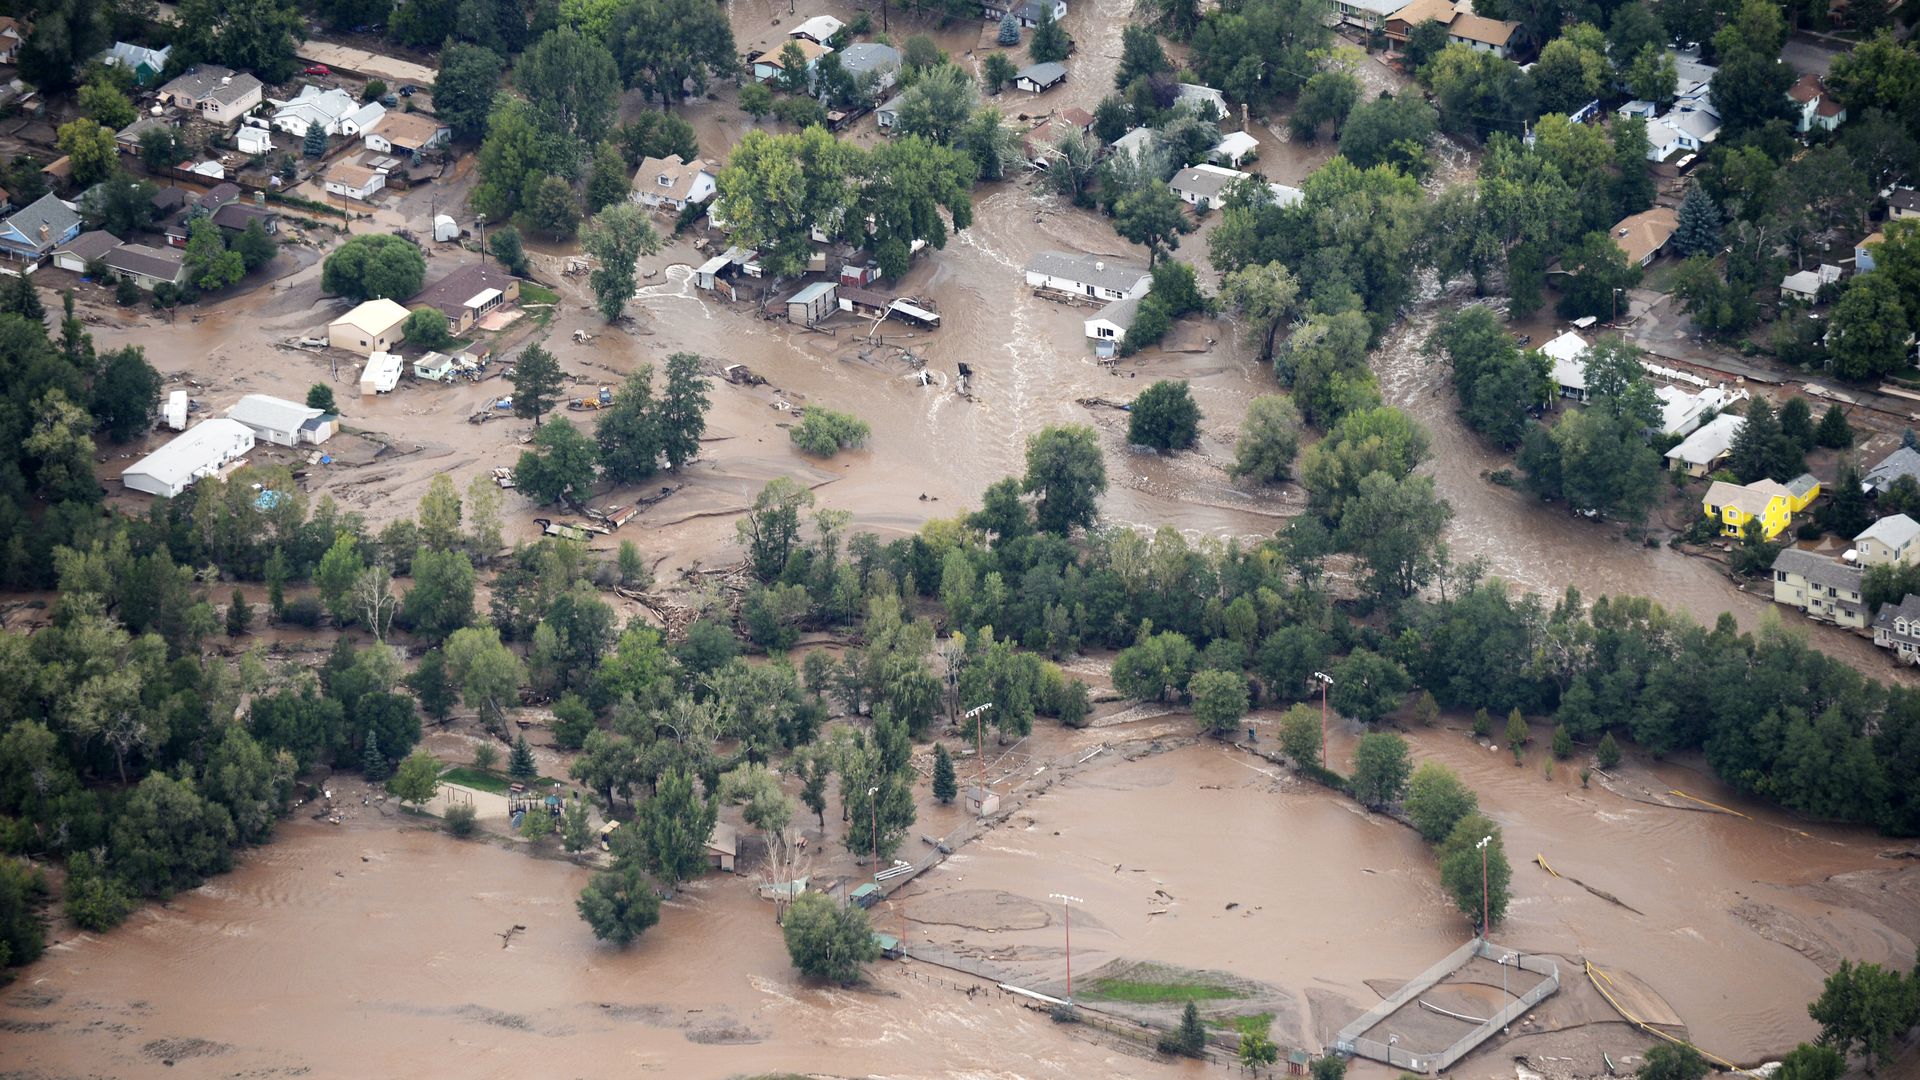 An aerial photograph shows the damage in Lyons from the flood on Sept. 13, 2013. Photo: RJ Sangosti/The Denver Post via Getty Images